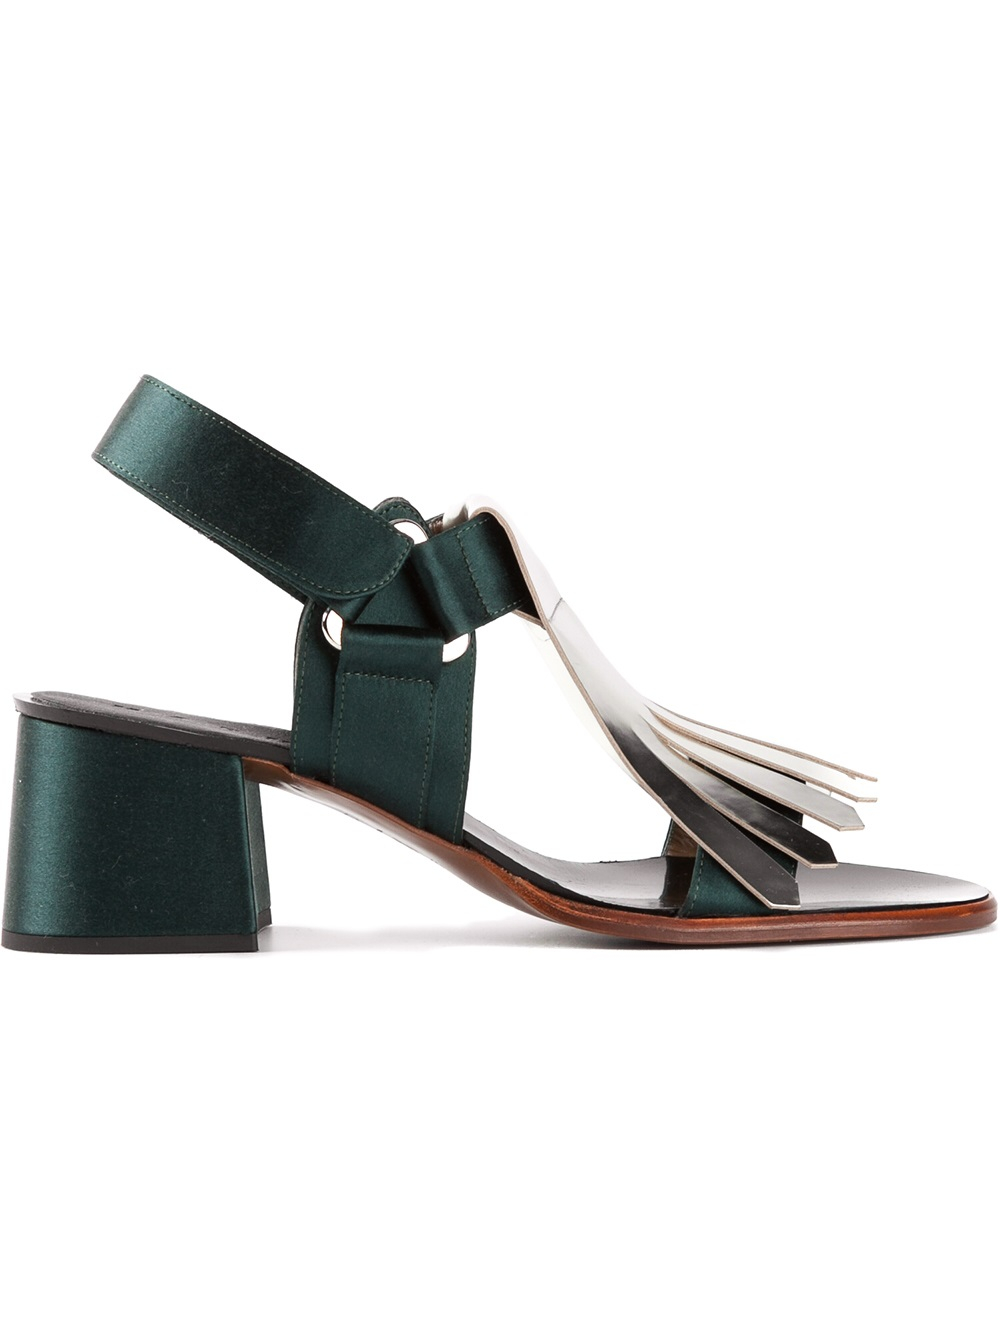 Marni Fringed Panel Sandals in Green - Lyst